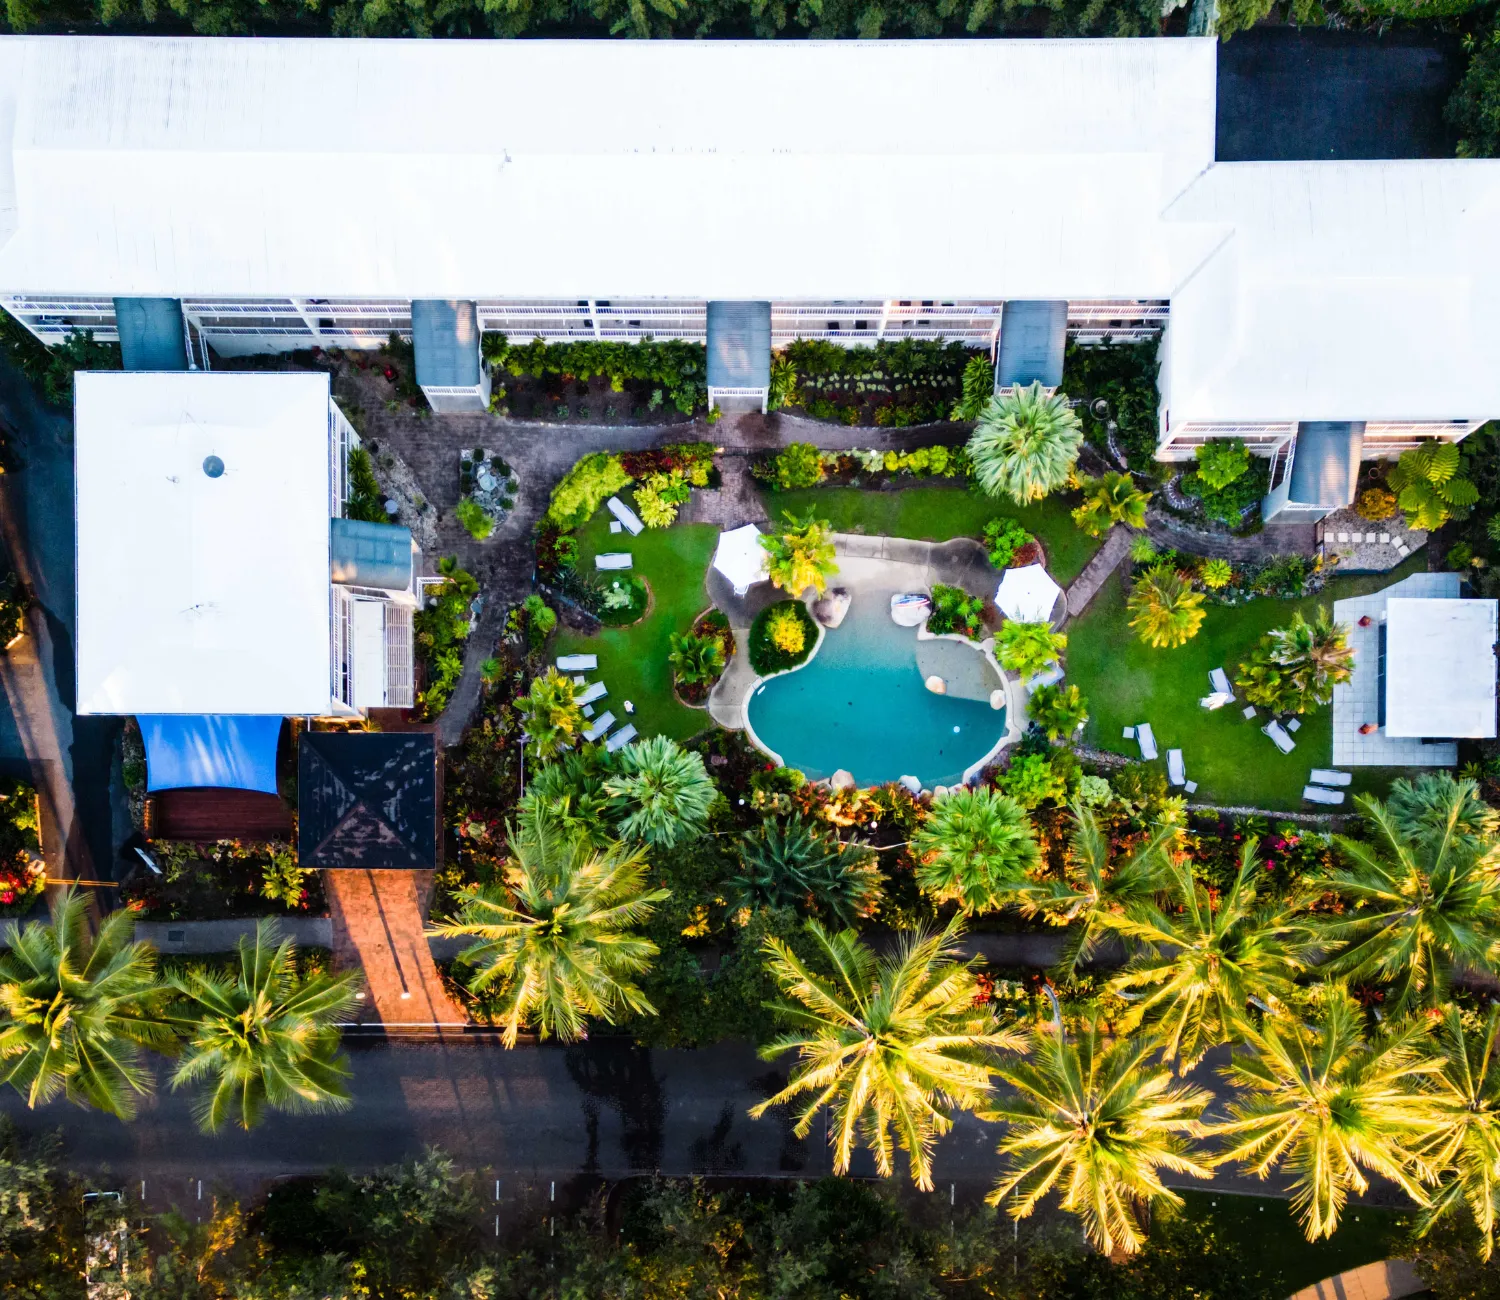 birds eye view of Melaleuca Resort Showing the pool and outdoor area with lush gardens and beautiful palm trees.